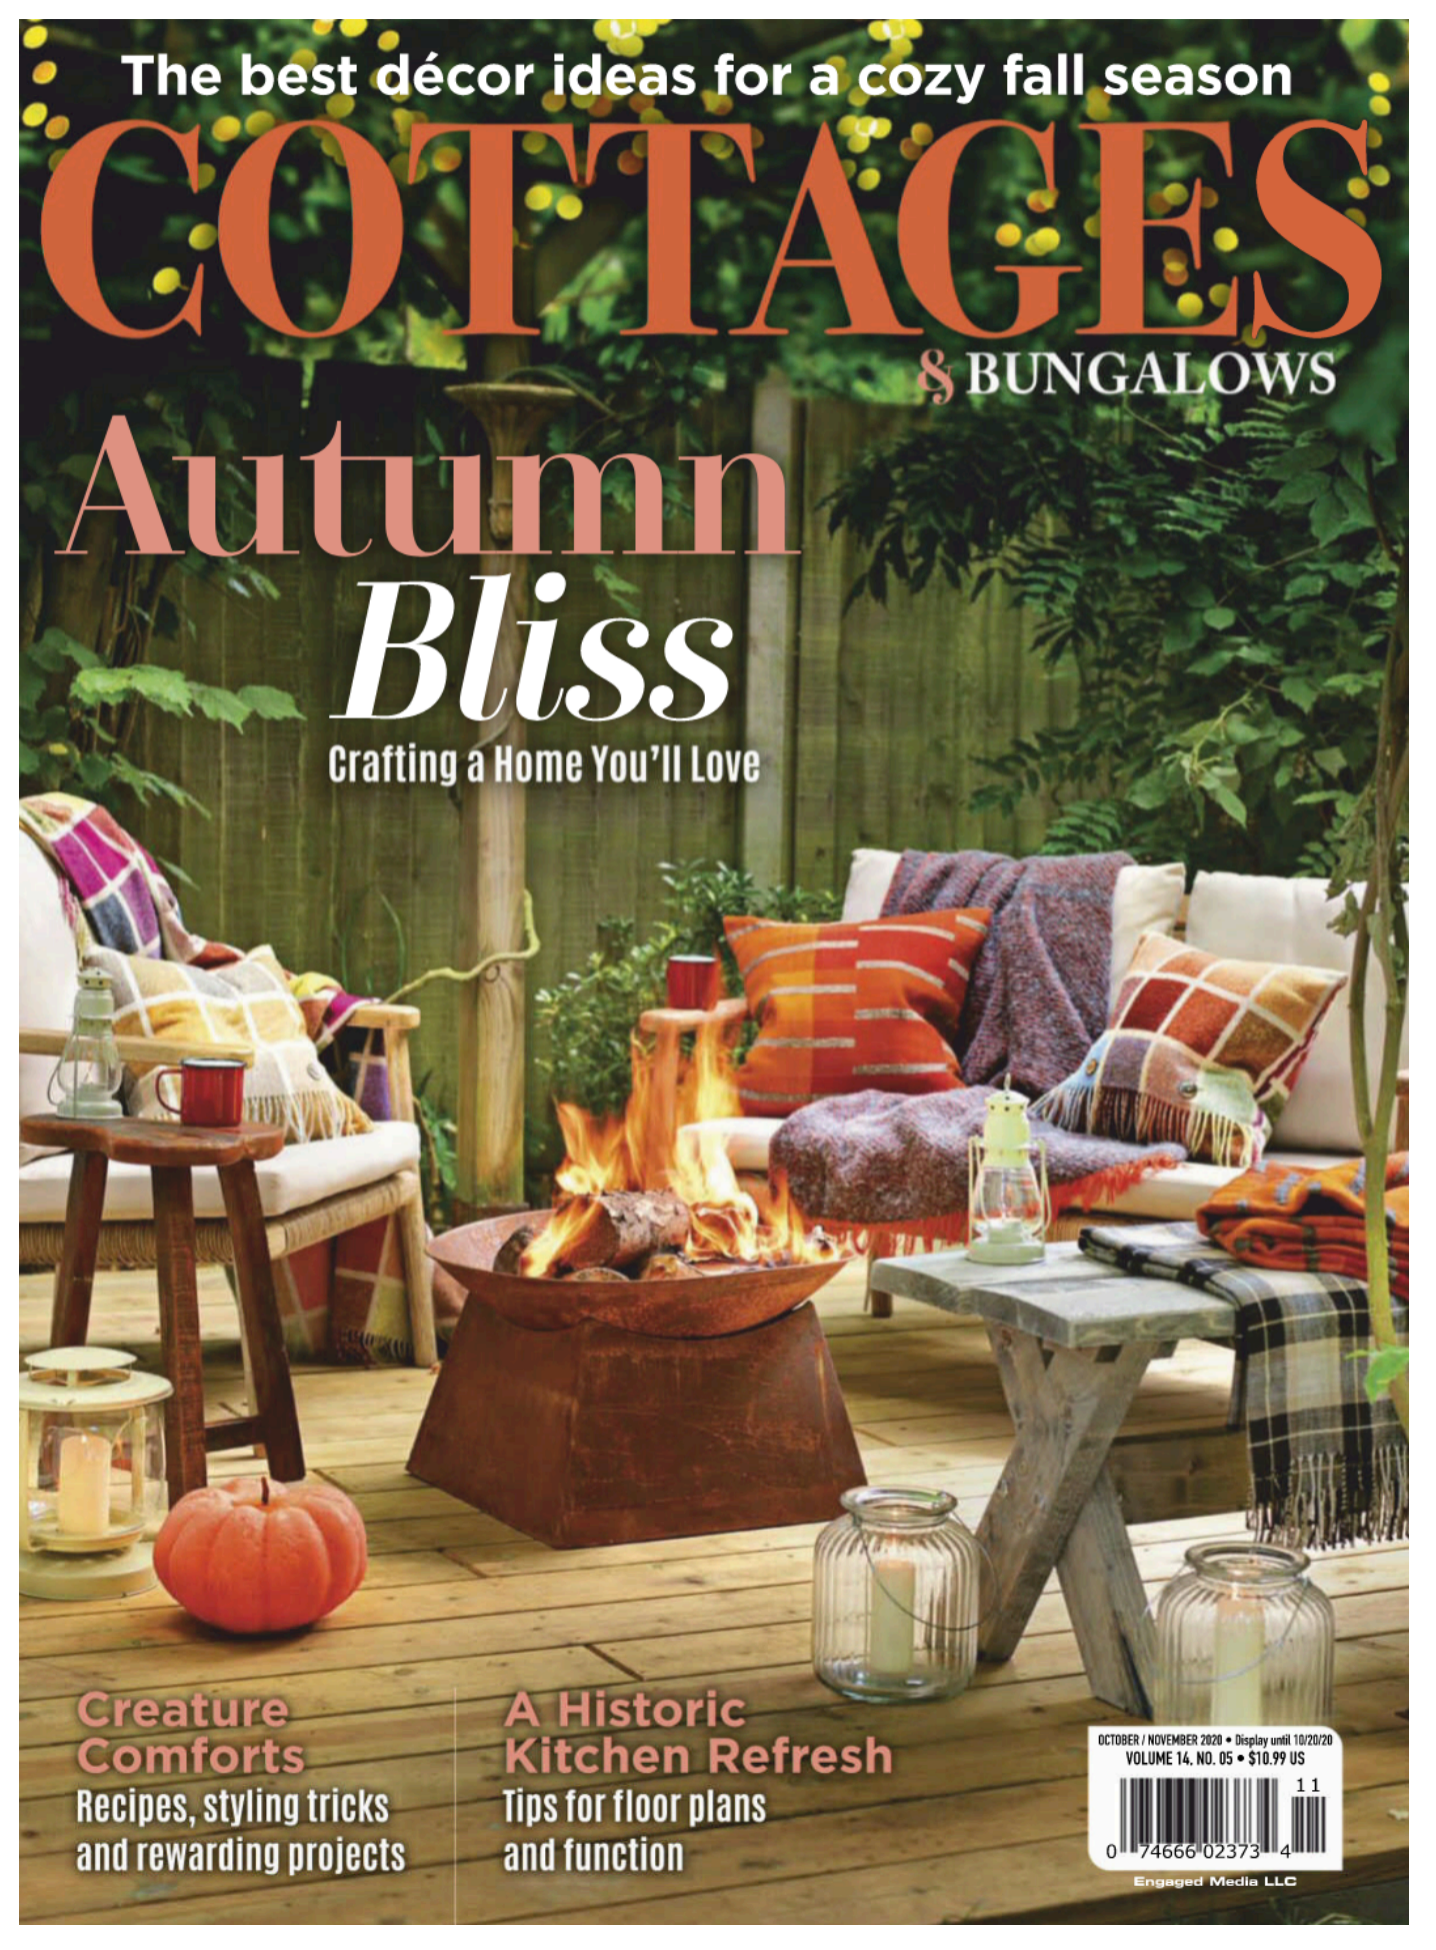 The cover of Cottages and Bungalows magazine, a bonfire on a wooden deck outside with chairs and blankets around.